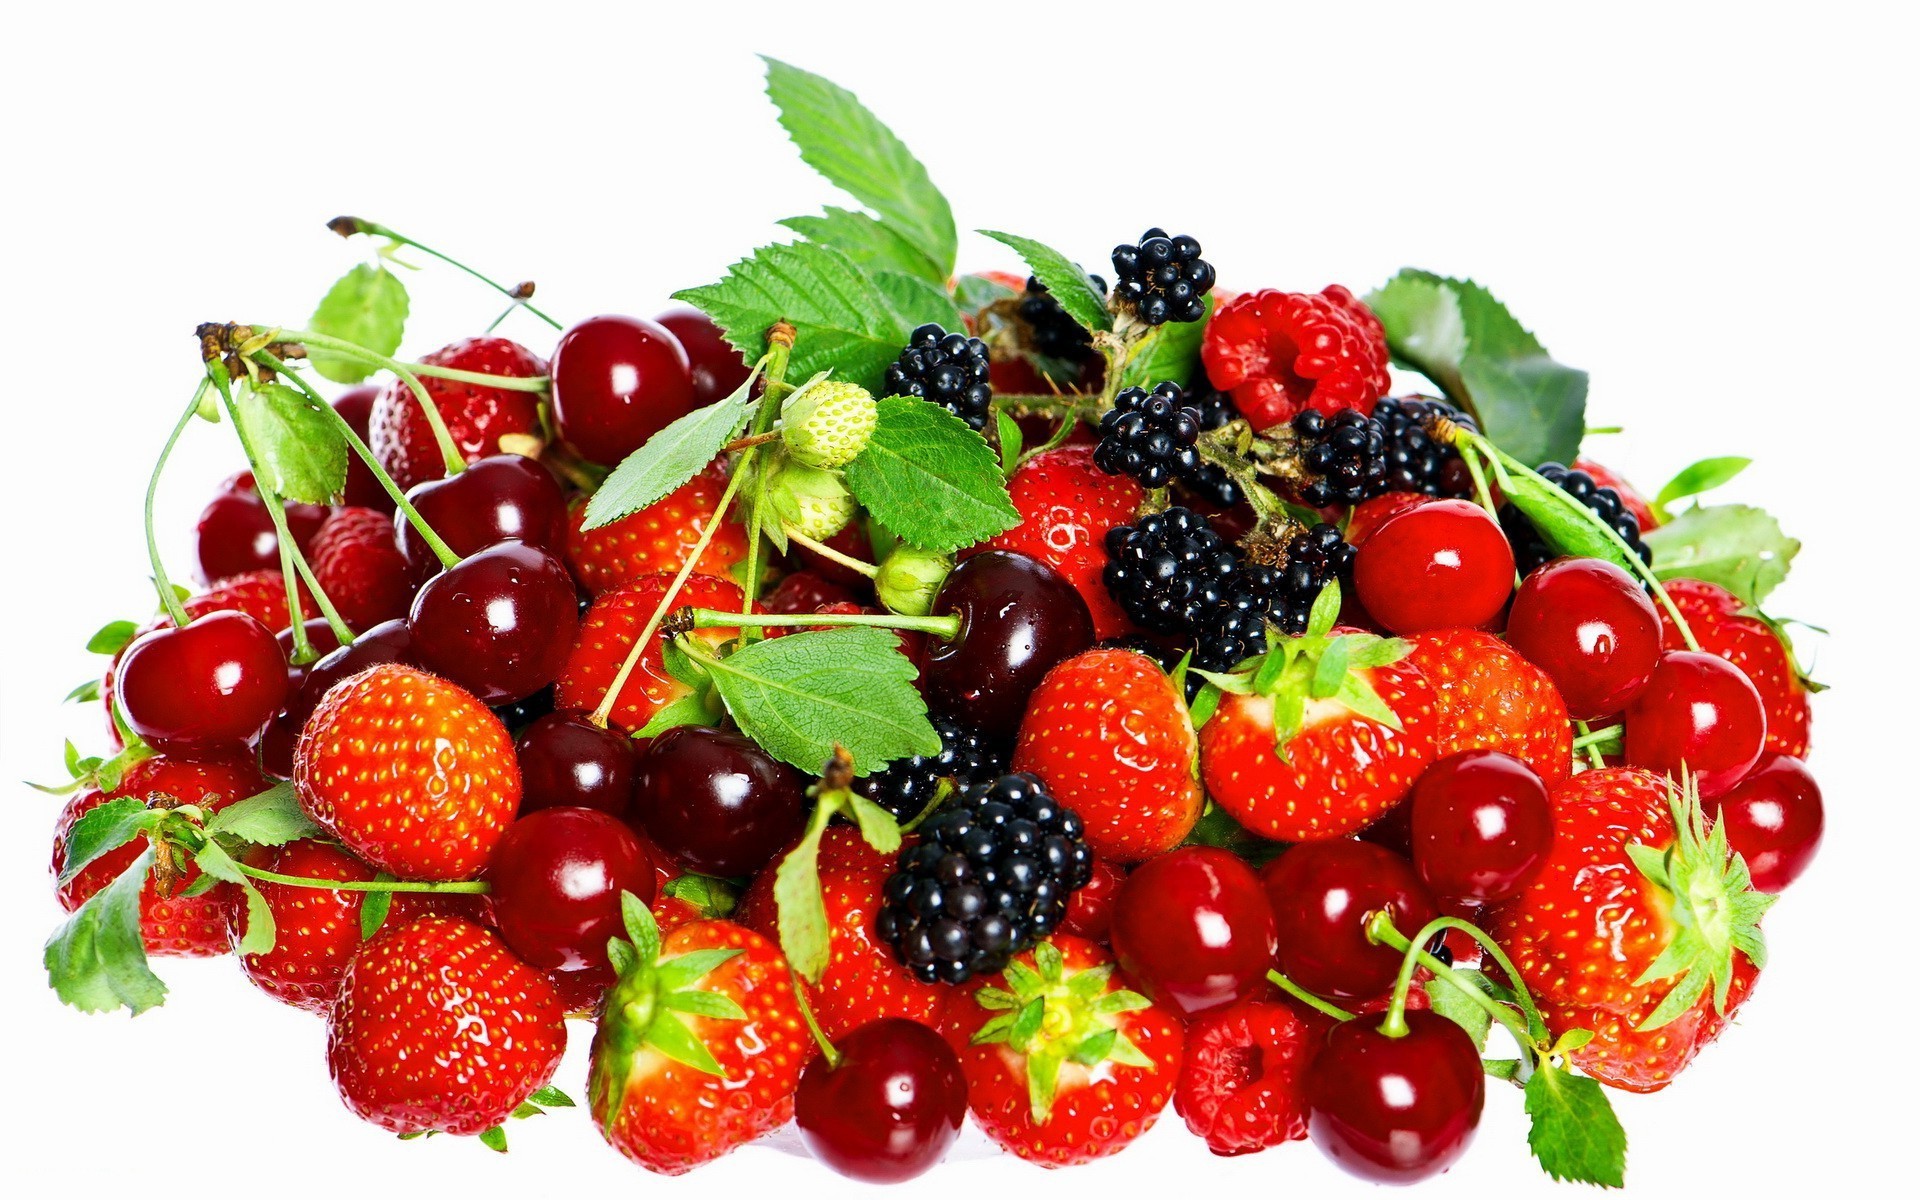 berries fruit berry healthy juicy food delicious leaf nutrition confection sweet health diet tasty strawberry vitamin refreshment epicure freshness cherry